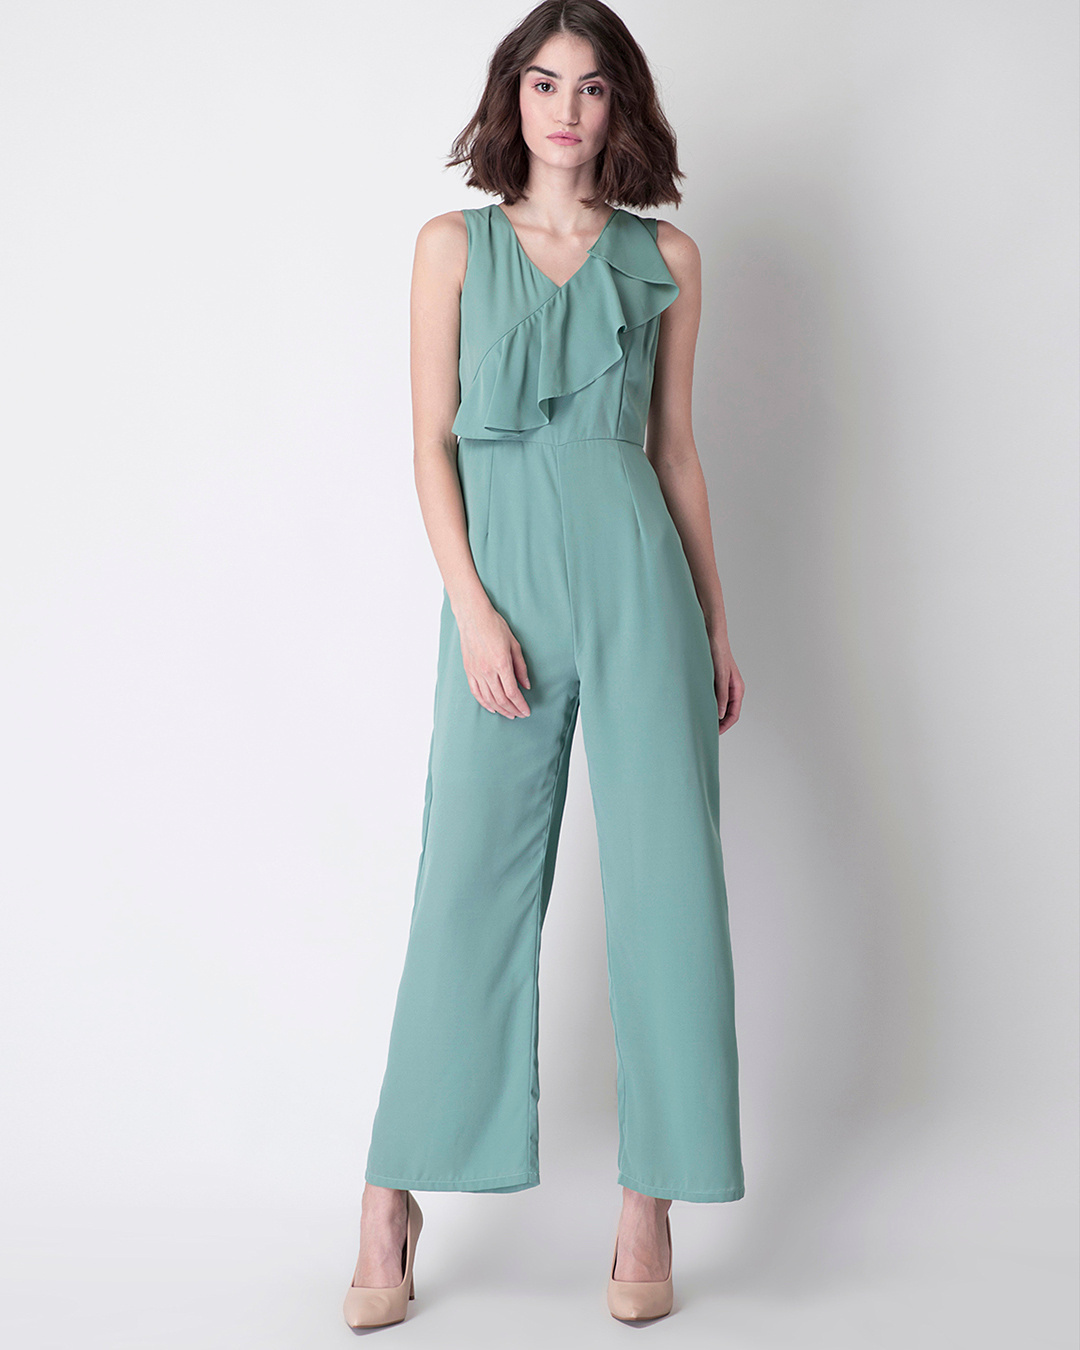 Buy FabAlley Peach Striped Strappy Front Knot Jumpsuit Online at Bewakoof